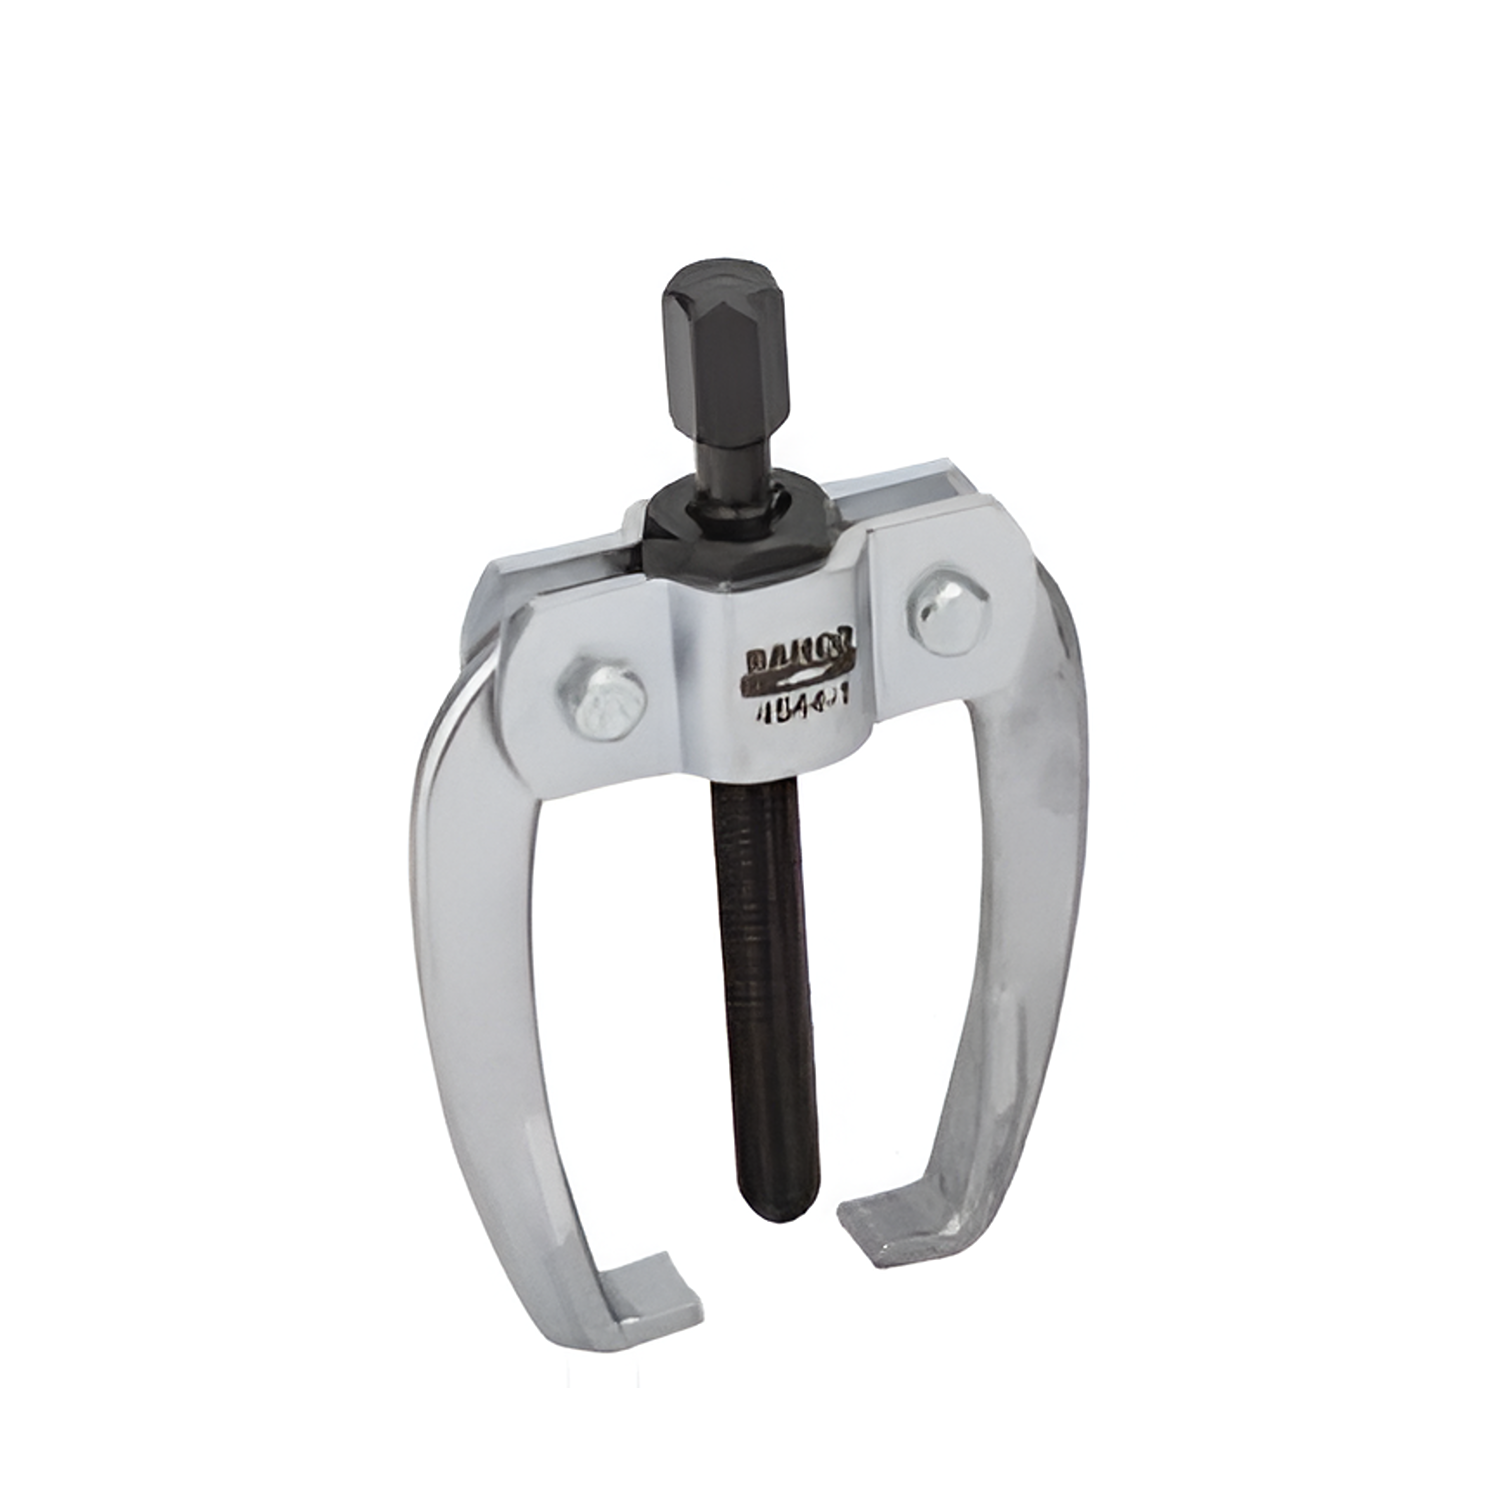 BAHCO 4544 2-Arm Heavy Duty Puller with Galvanized Finish - Premium 2-Arm Heavy Duty Puller from BAHCO - Shop now at Yew Aik.